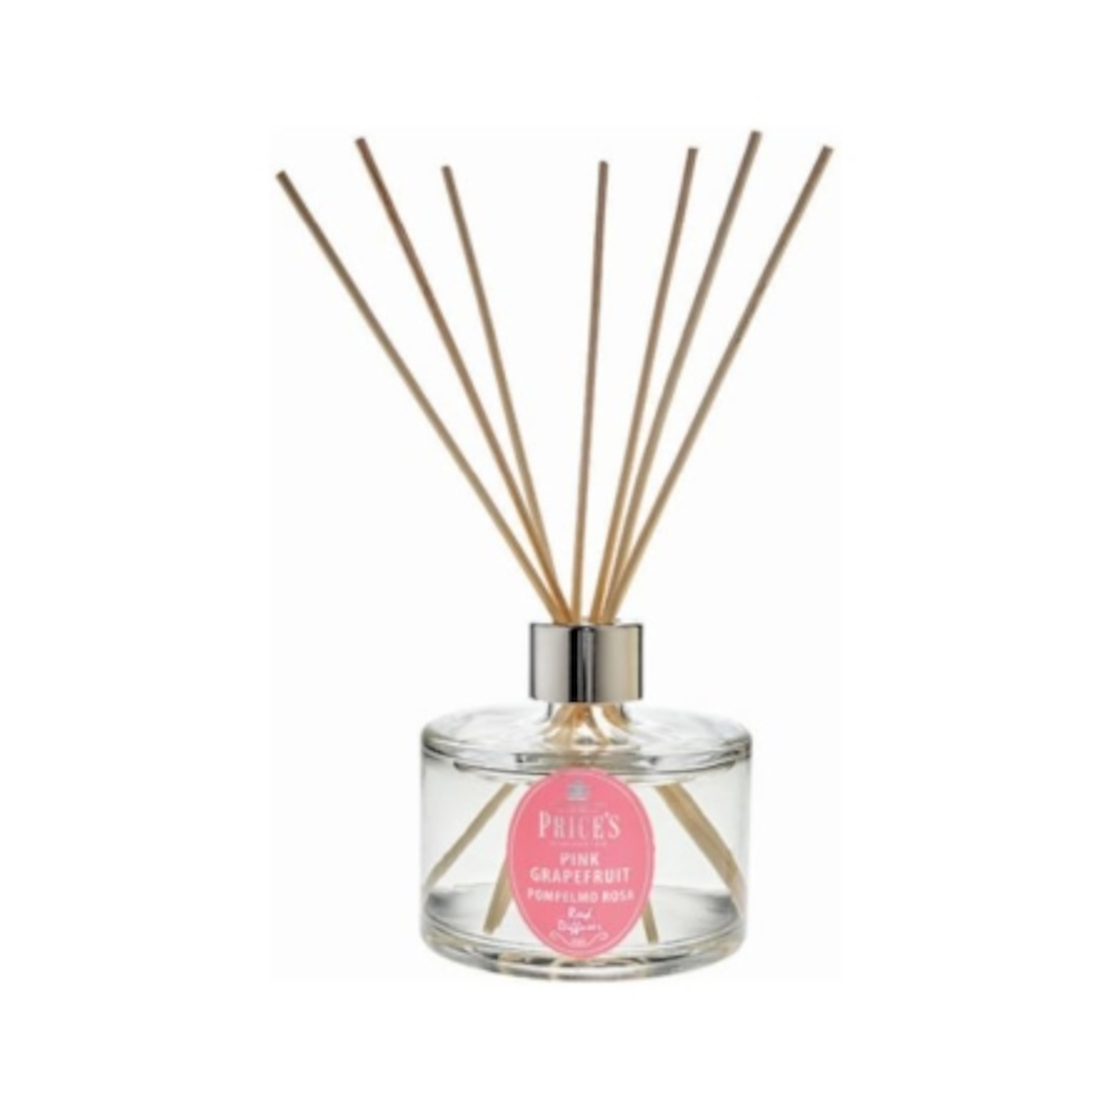 Prices Candles Pink Grapefruit 250ml Reed Diffuser